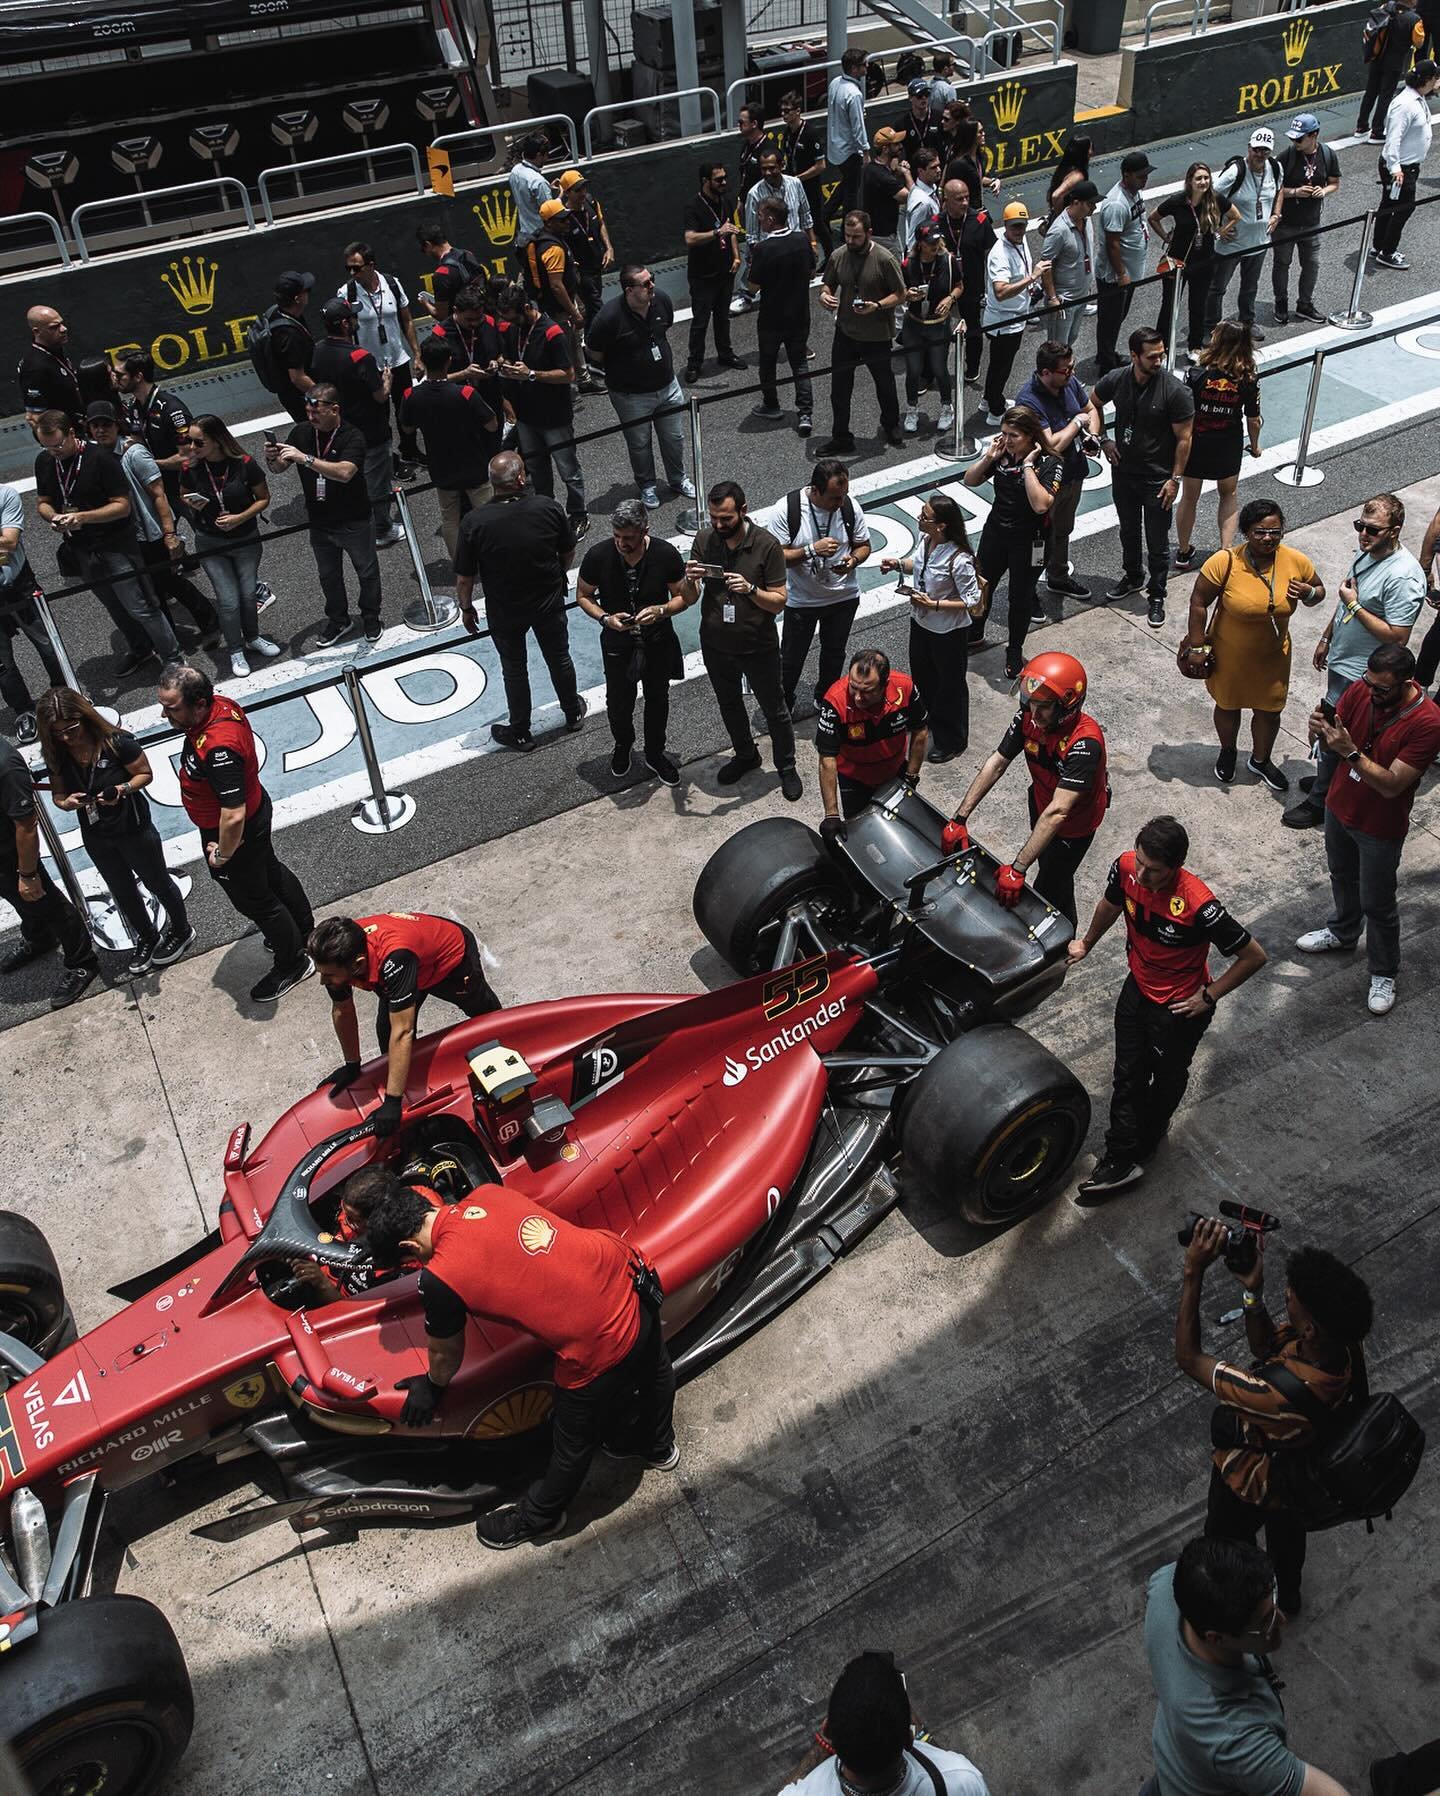 Money on&hellip; red? 🏎️ Monaco was my first ever F1 race w/ @16kagency and will probably remain my favourite race of the year!

#f1 #formula1 #monaco #monacograndprix #race #alist #contentcreator #montecarlo #travel #contentphotographer #photograph